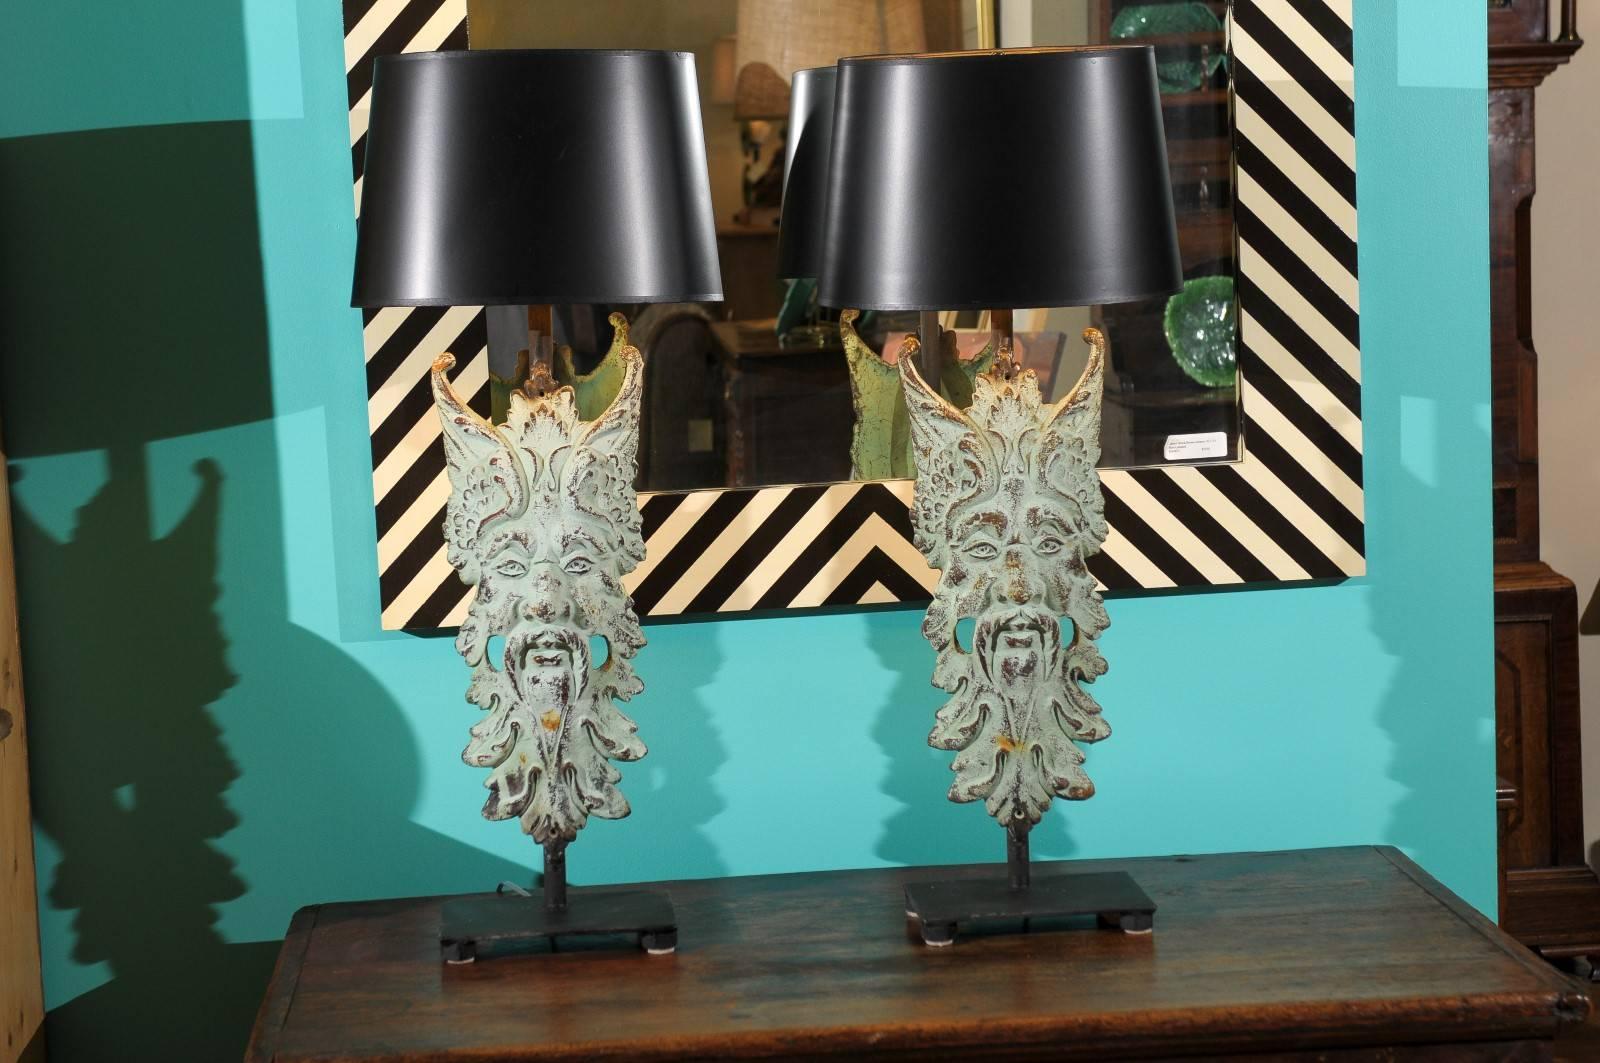 These decorative lamps were made from architectural elements. The mask lamps would look great with any style and could be used in a variety of rooms in your home.